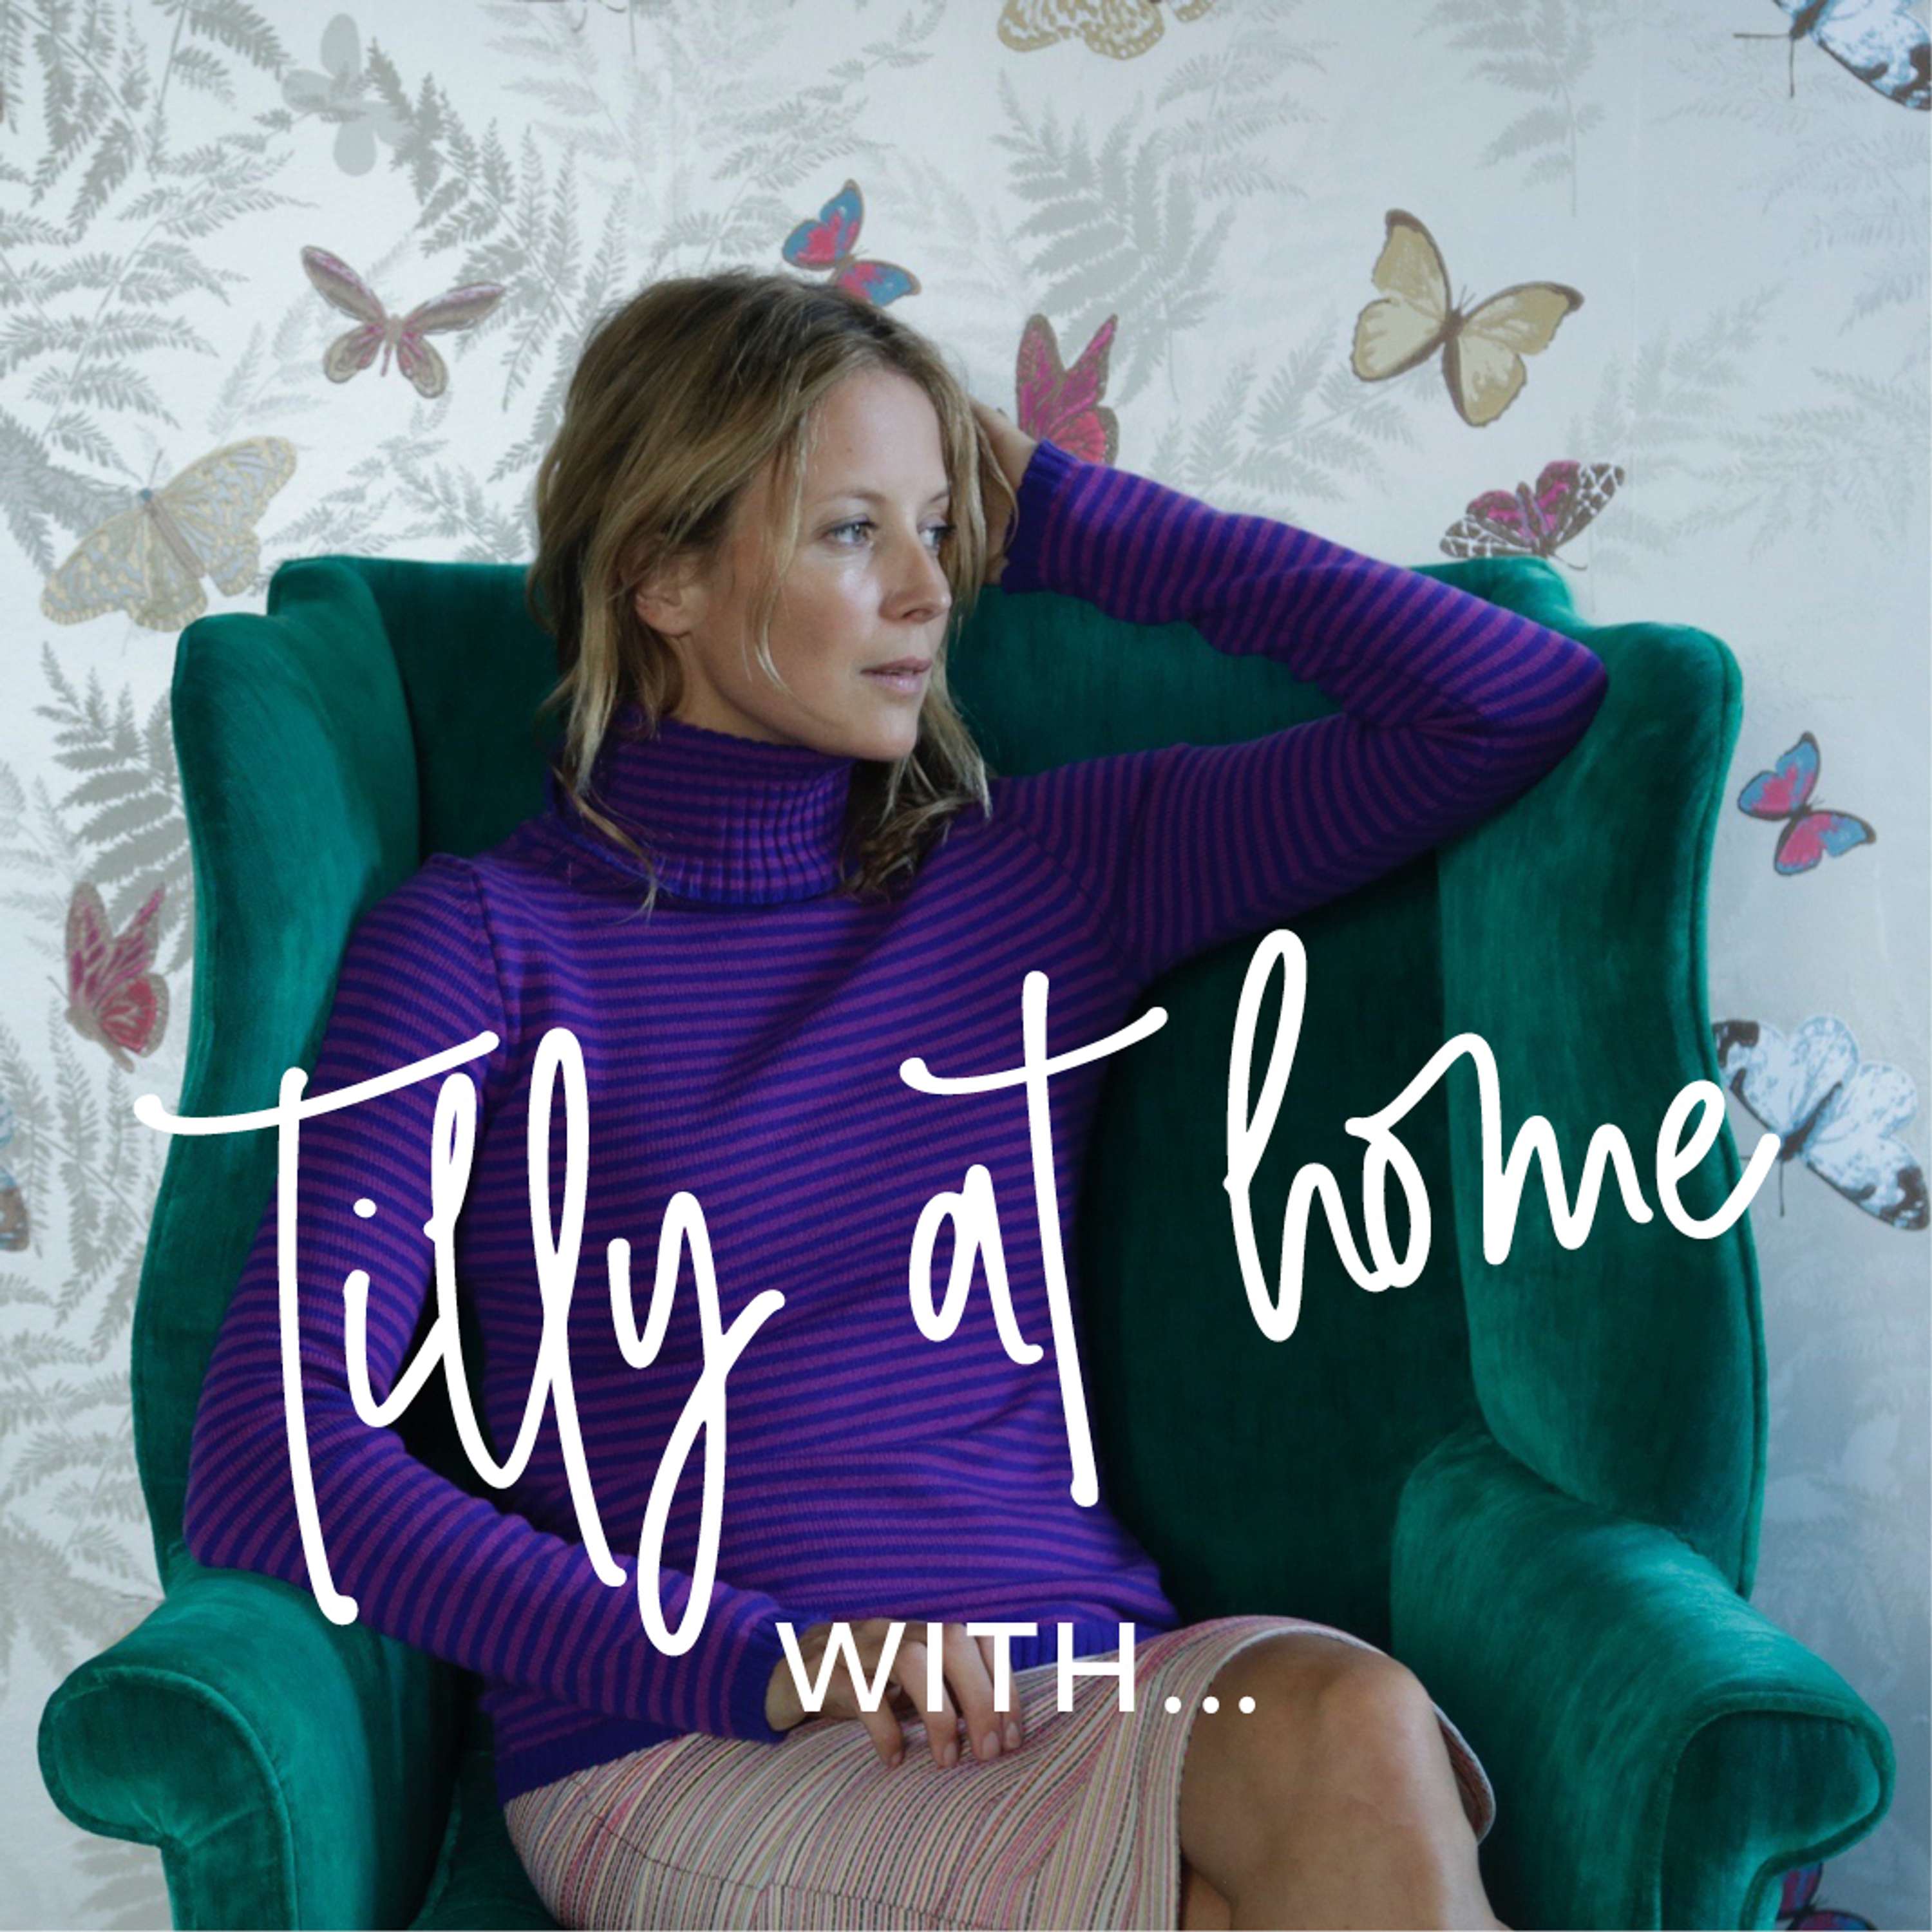 Tilly at home with...